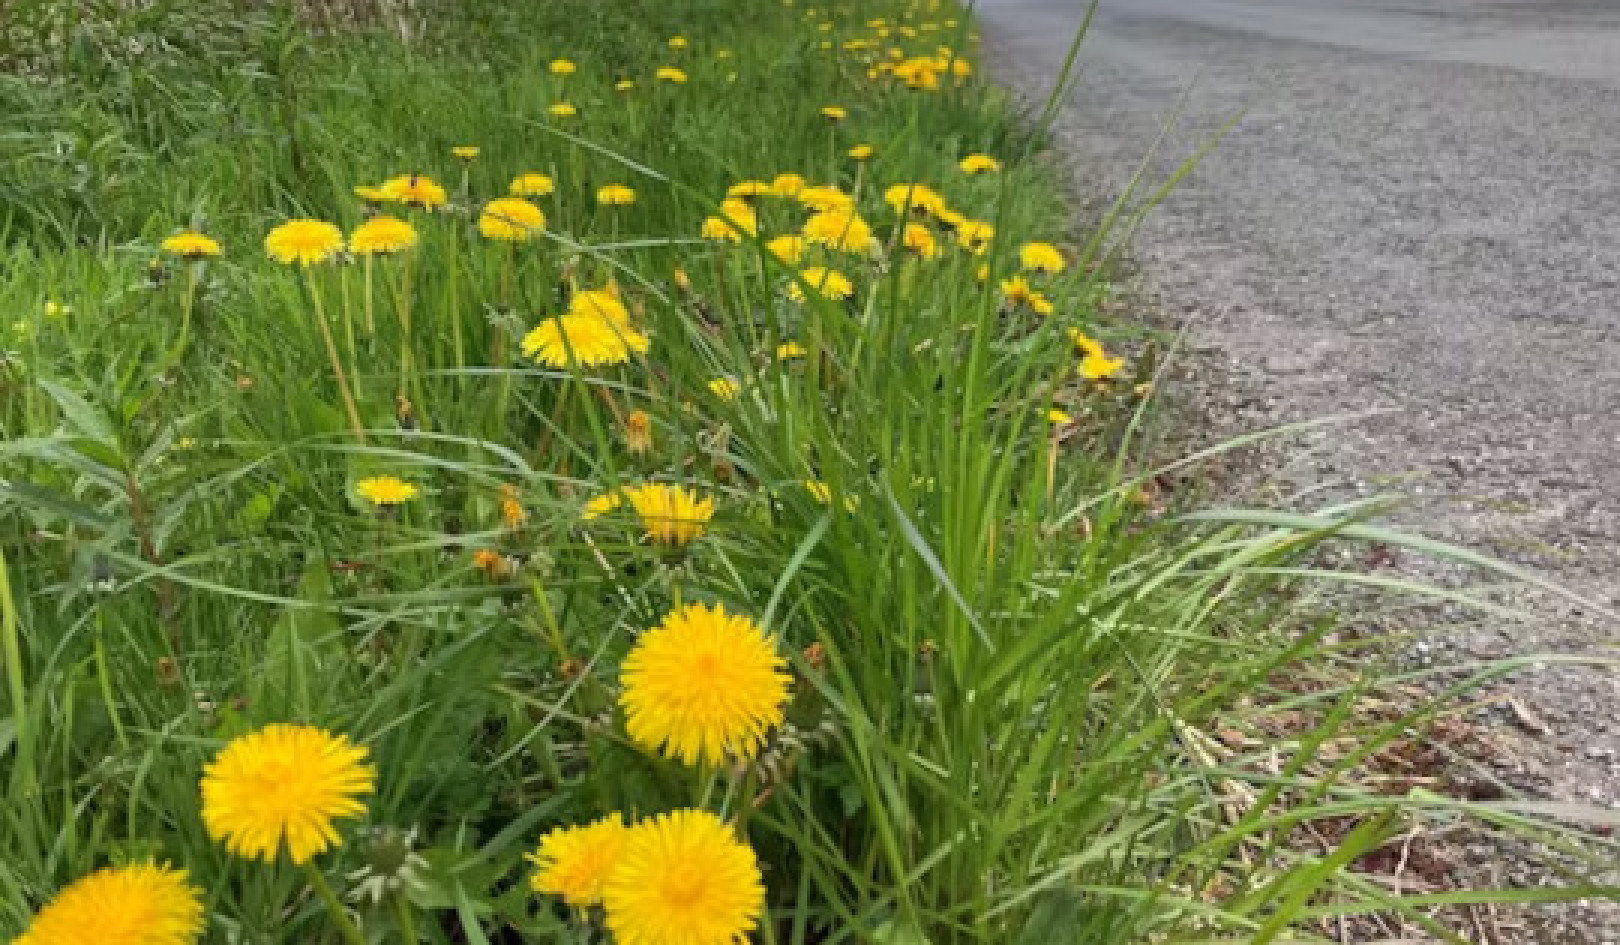 Why Should We Learn to Love Dandelions?